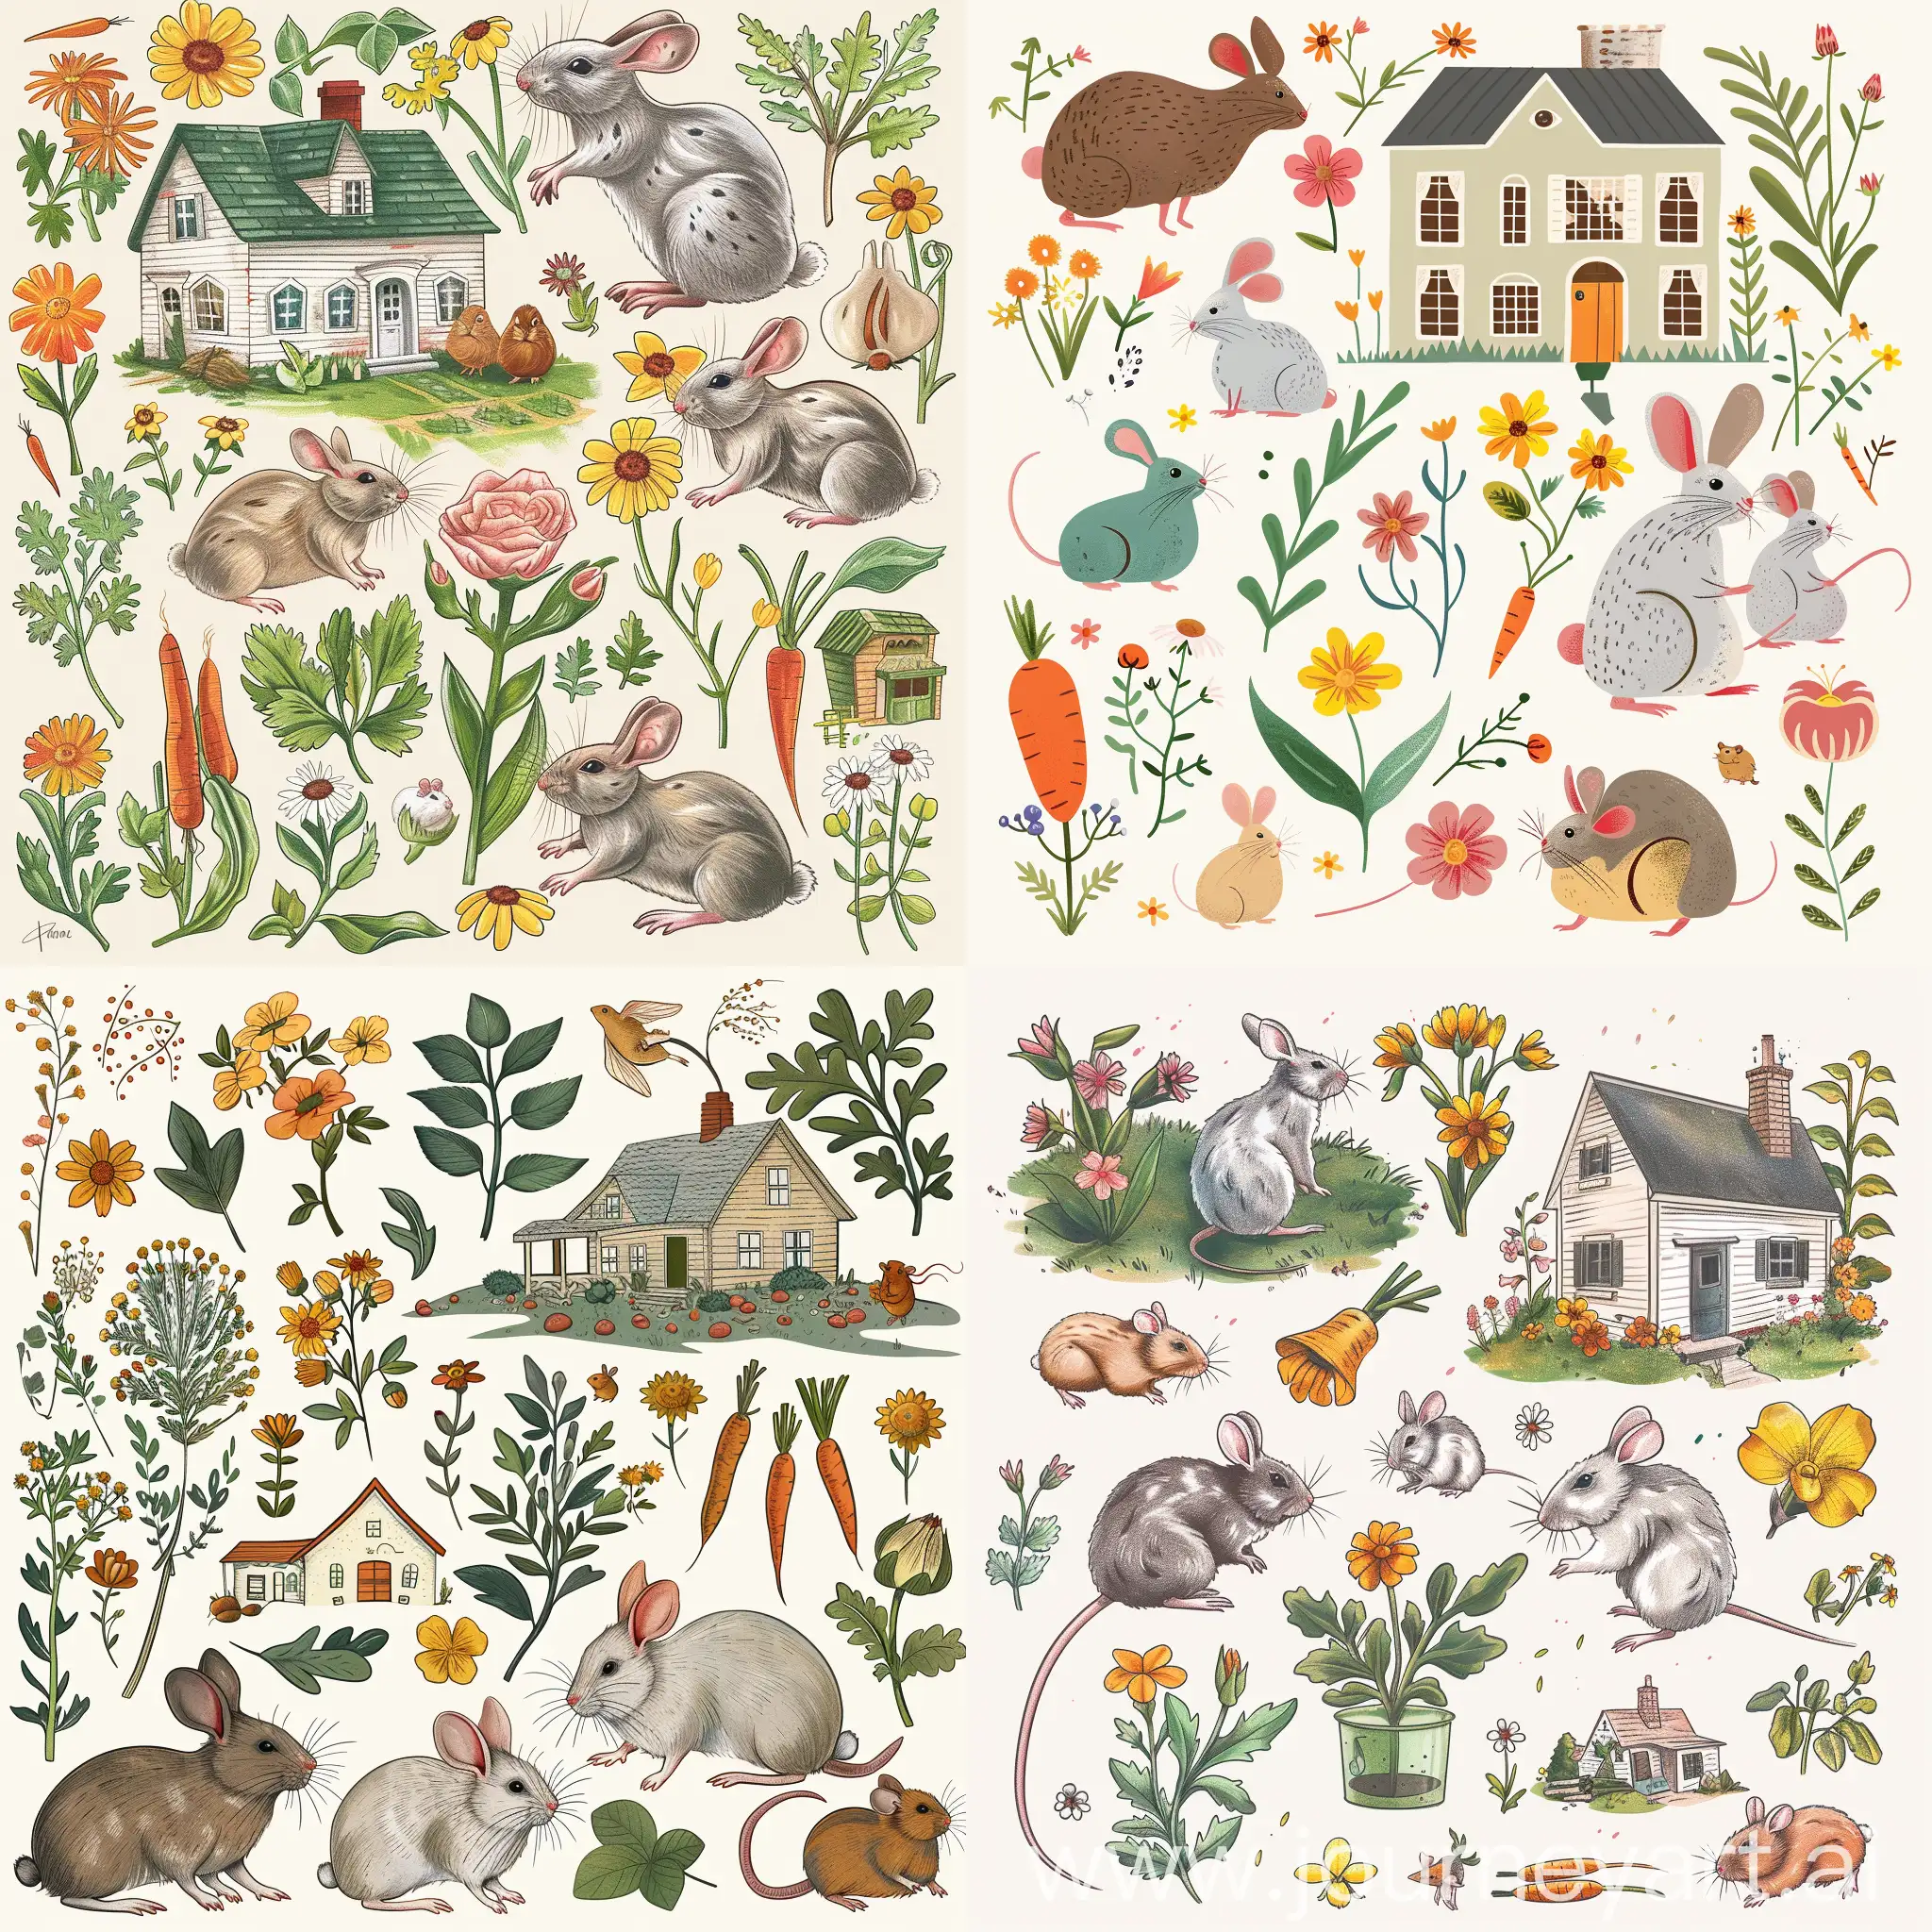 Peaceful-Countryside-Garden-with-Small-Animals-and-Crops